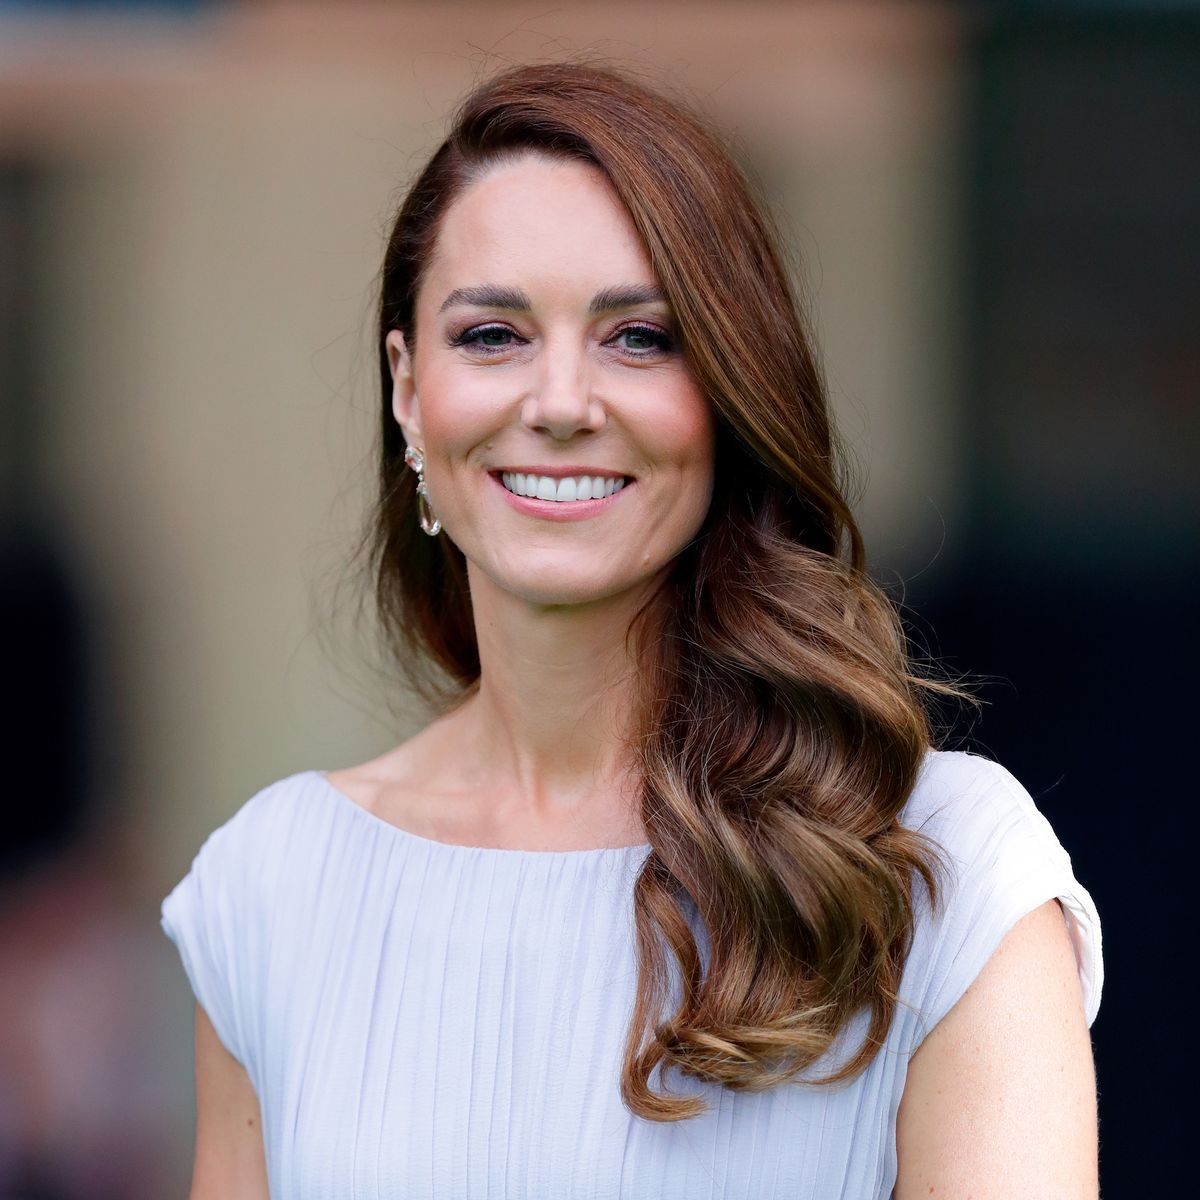 Kate Middleton's diet and routine uncovered